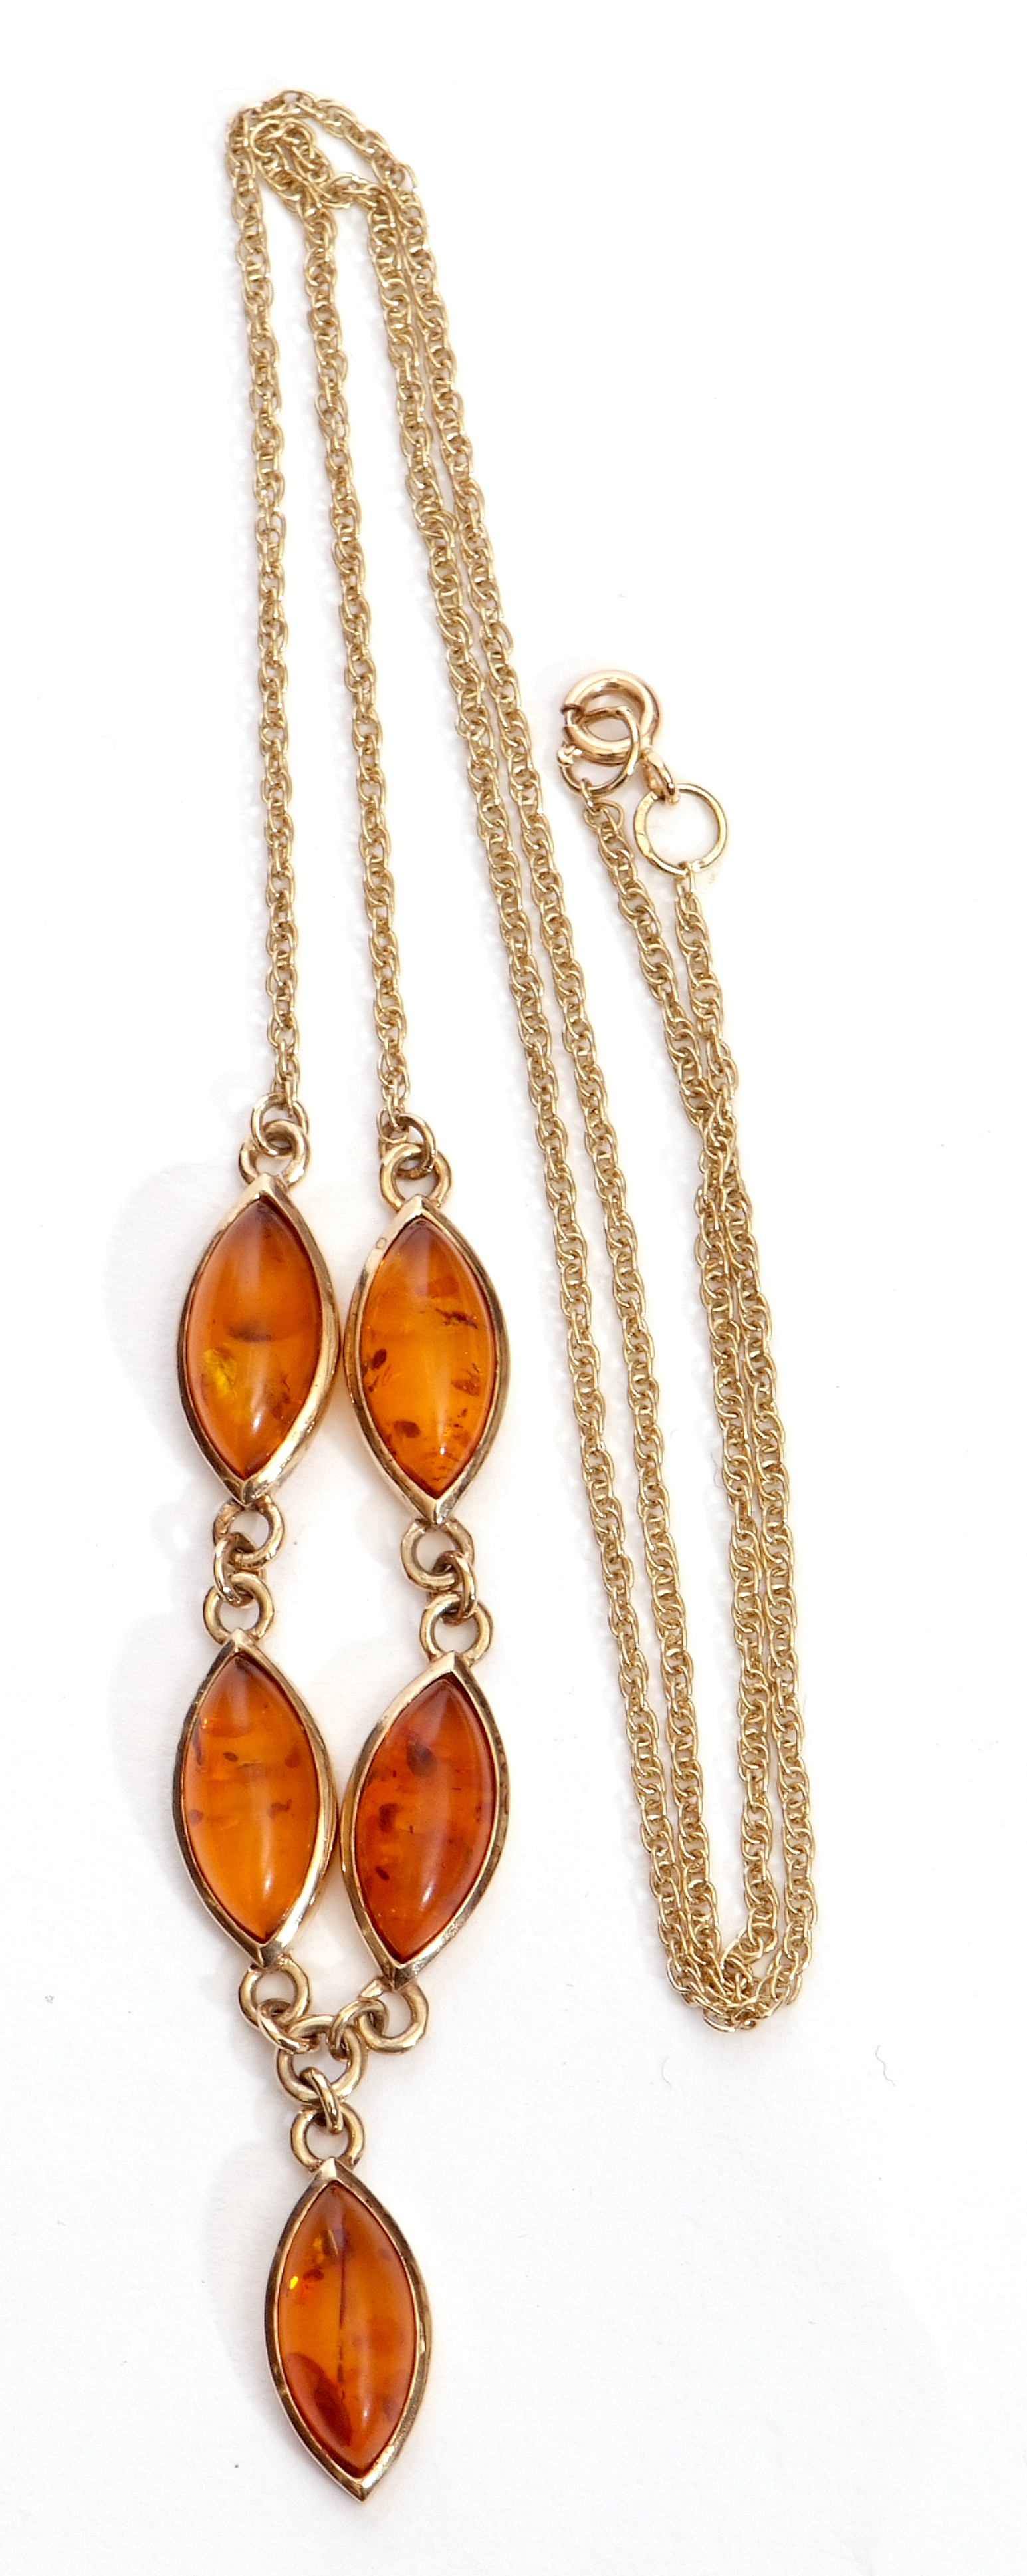 Modern yellow metal and amber necklace, a design featuring four lozenge shaped links and a - Image 2 of 2